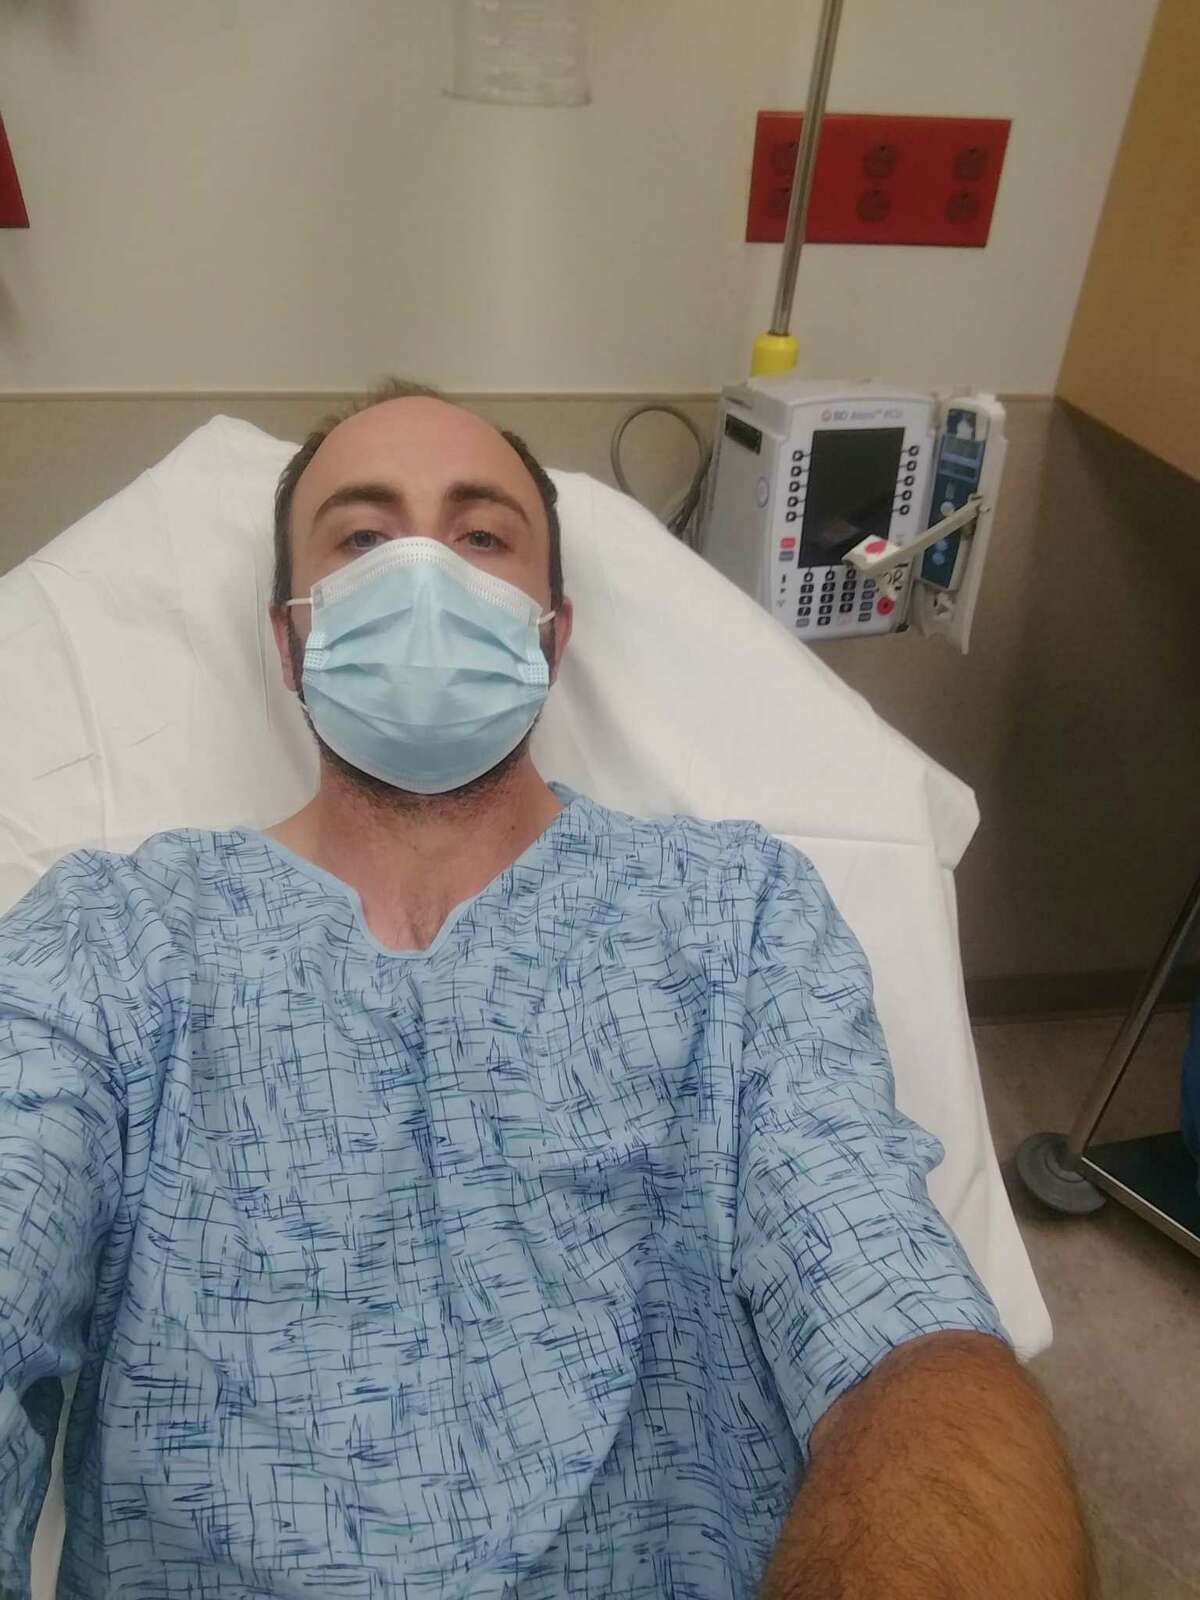 Colin Bennett, 34, who spent about $100,000 on everything from stem-cell infusions to the animal de-wormer ivermectin to try to cure his many long COVID symptoms, is seen here in an Orange County emergency room last year during an especially difficult period. His do-it-yourself methods worked no better than standard medical therapies, he said.